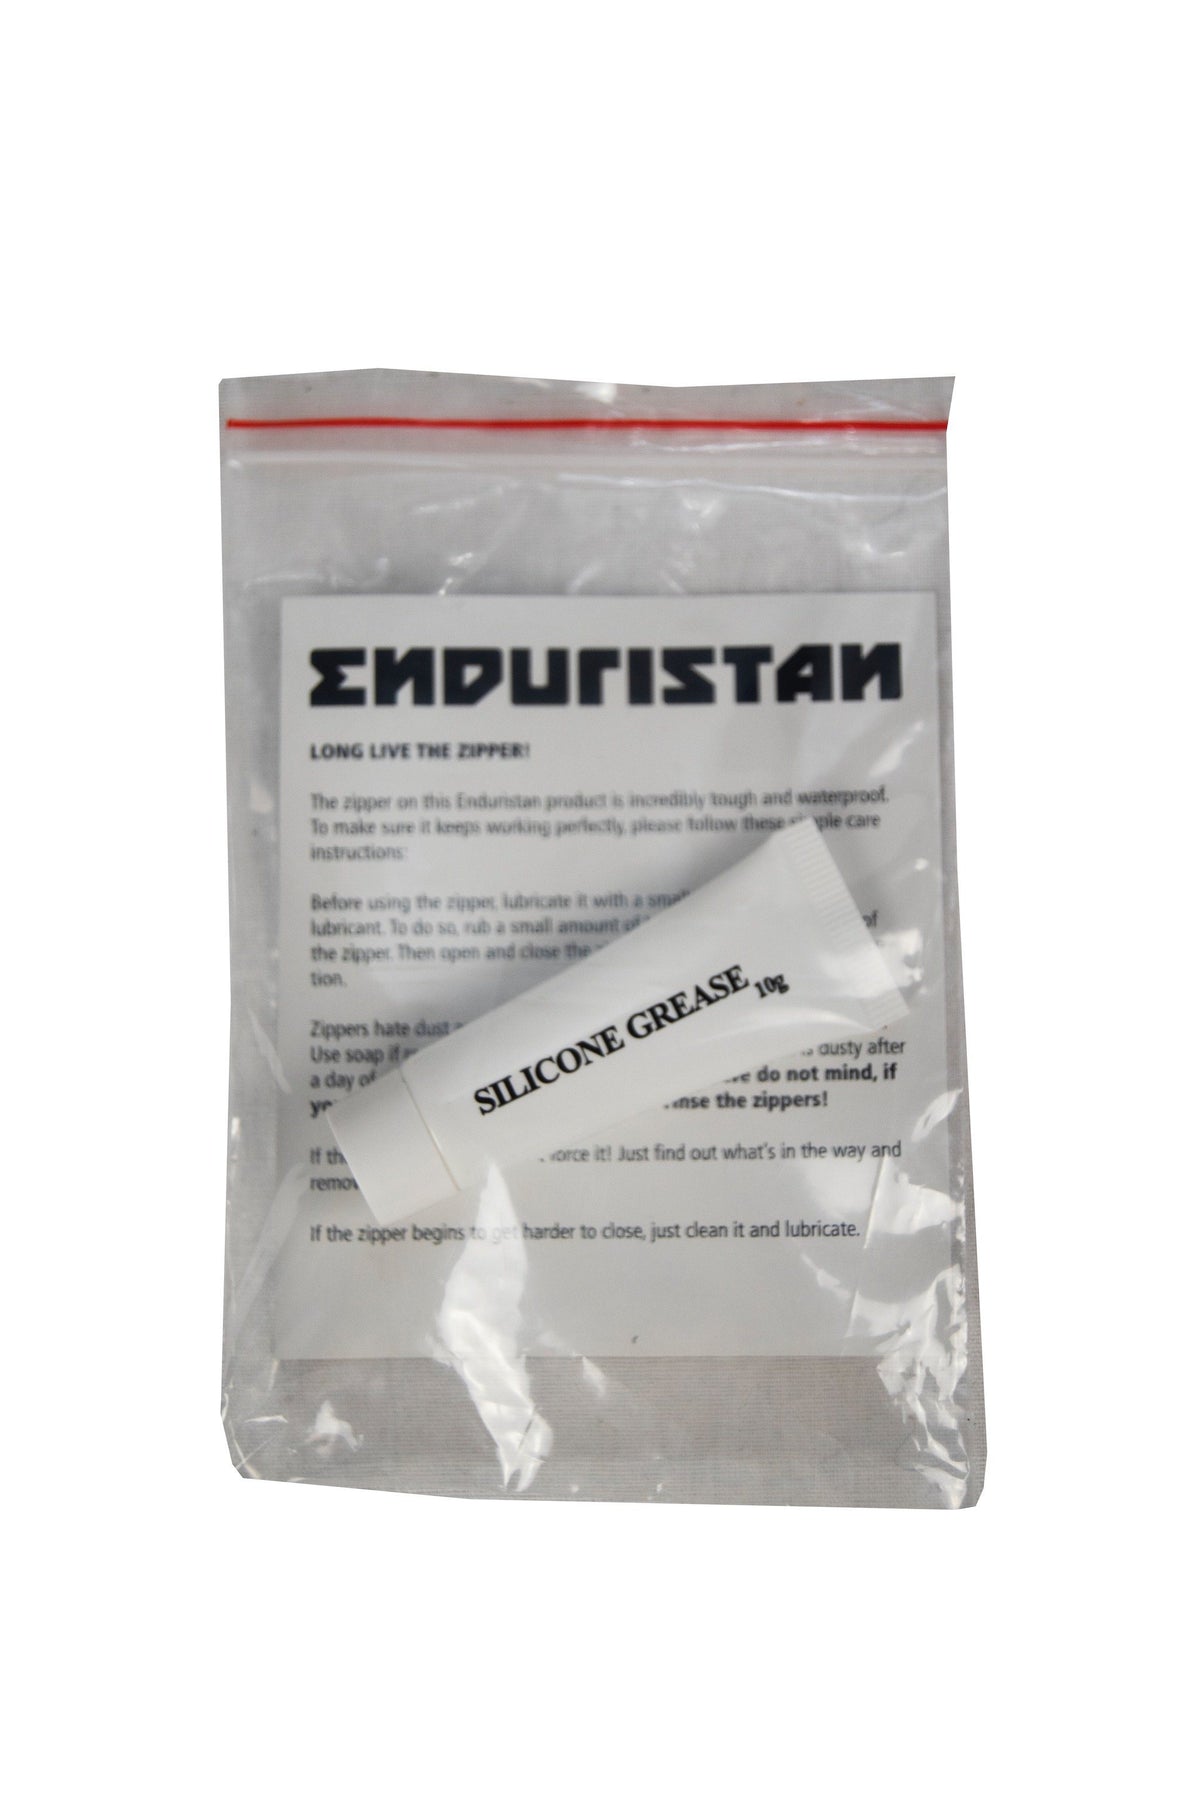 Enduristan USA, Zipper Lube Zipper Lube LURE-003, accessories, adventure back pack, adventure backpack, adventure bike luggage, adventure luggage, bmw gs tank bag, bmw gs tankbag, dirt bike luggage, dirtbike luggage, enduristan, enduristan uk, enduro luggage, luggage, motorbike bags, motorbike luggage, off road luggage, overland travel, soft motorcycle luggage, soft motorcycle panniers, soft saddle bags enduro, wateproof tank bags, waterproof enduro bags, waterproof motorcycle luggage, waterproof motorcycle